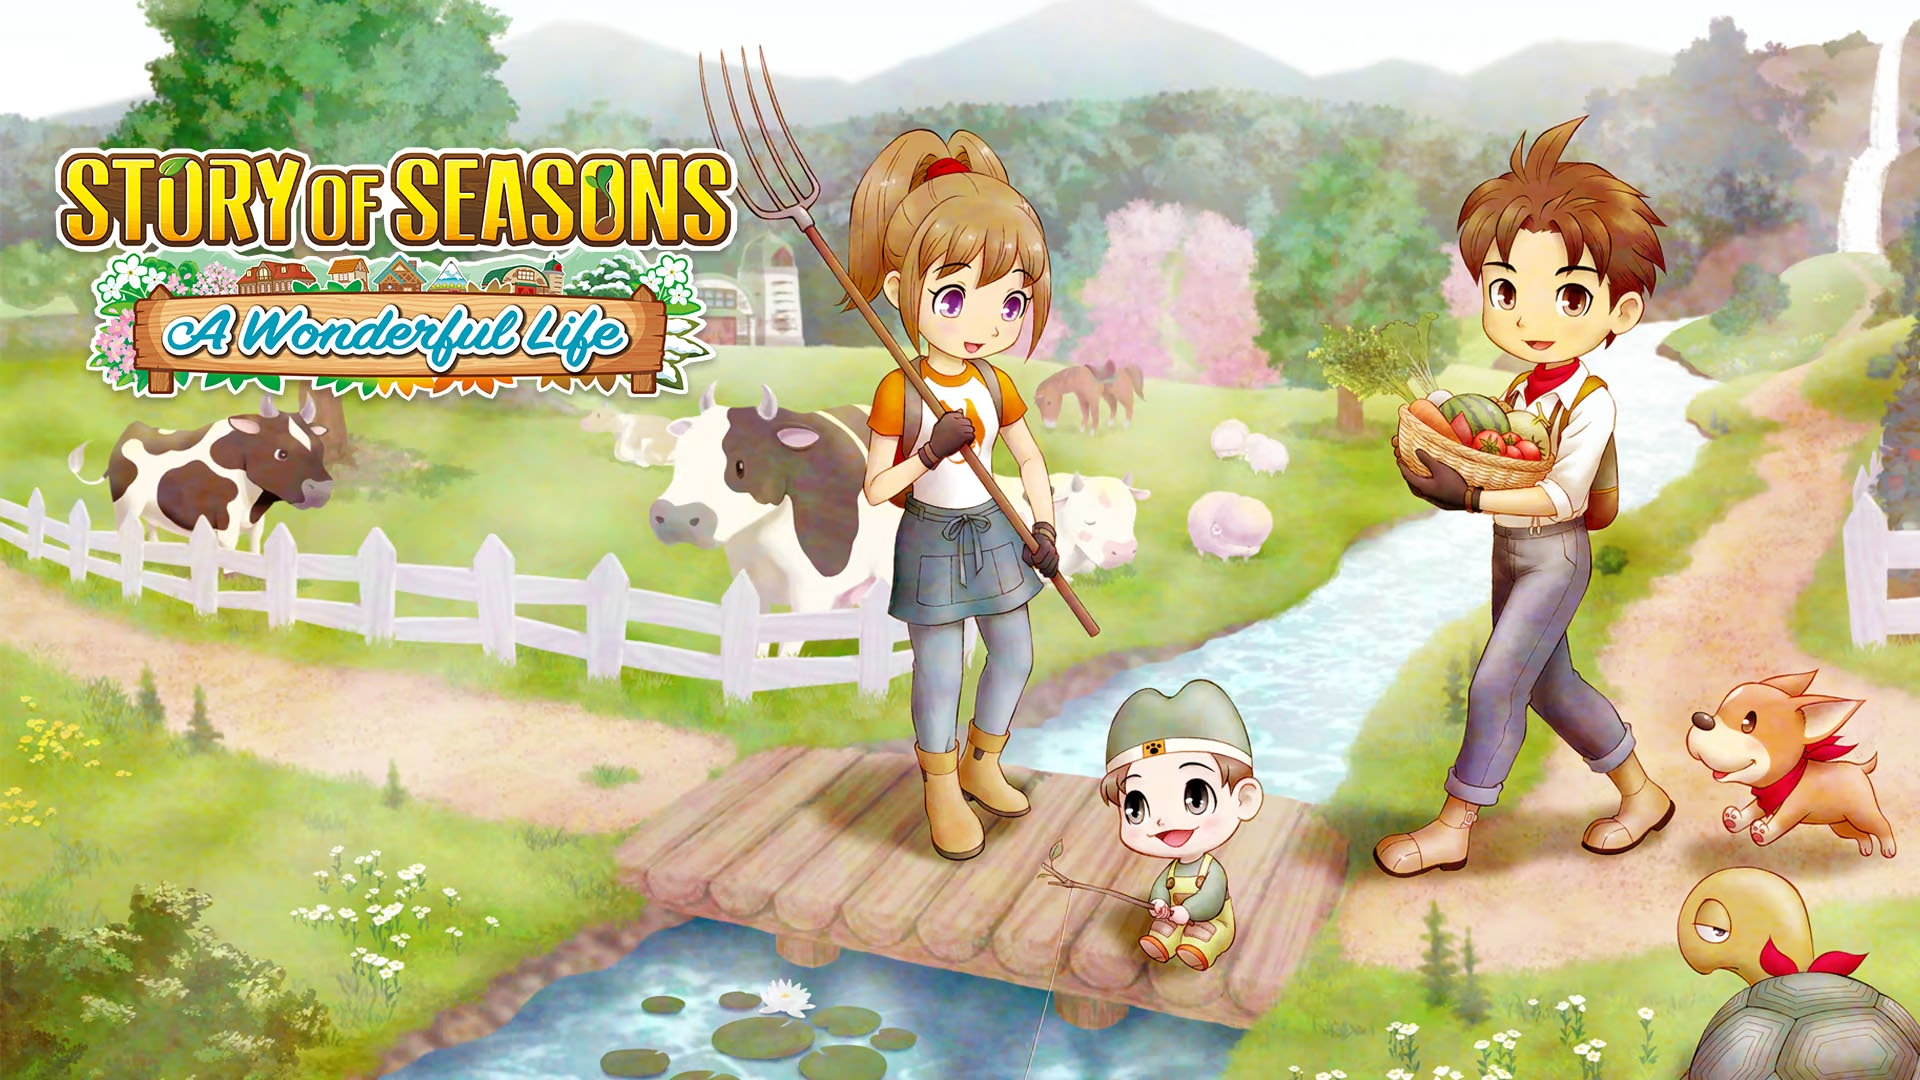 Story of Seasons: A Wonderful Life remake announced